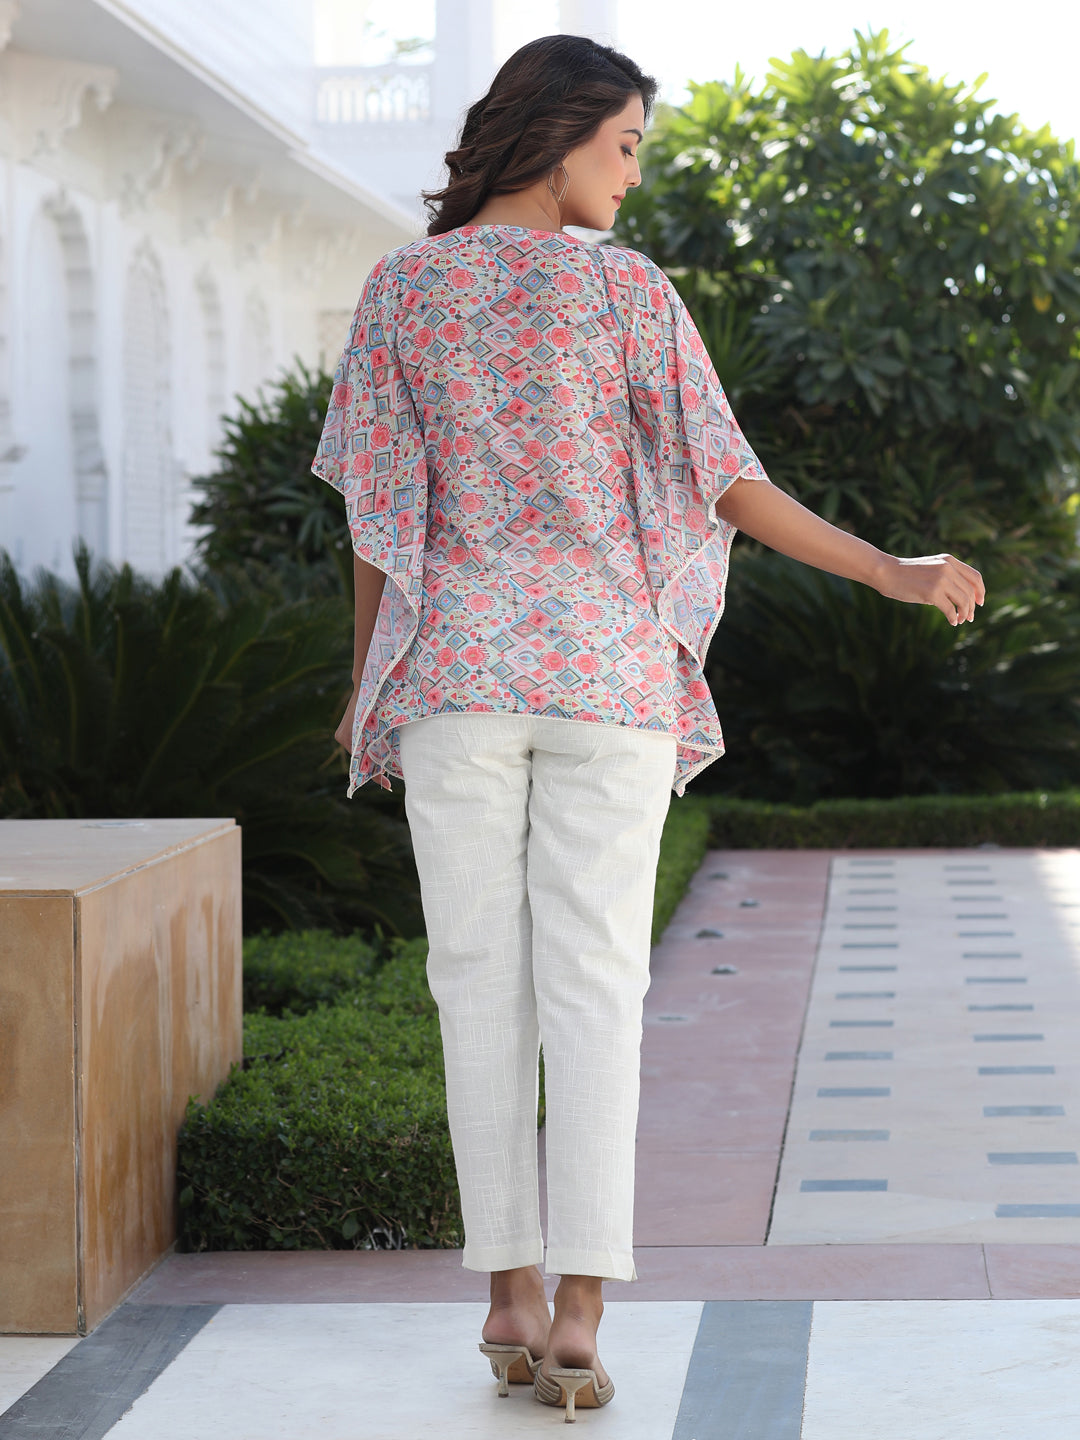 A Peach Geometric Printed Georgette Kaftan Top With Pintucks And Lace Details At The Yoke With Off- White Cotton Pants